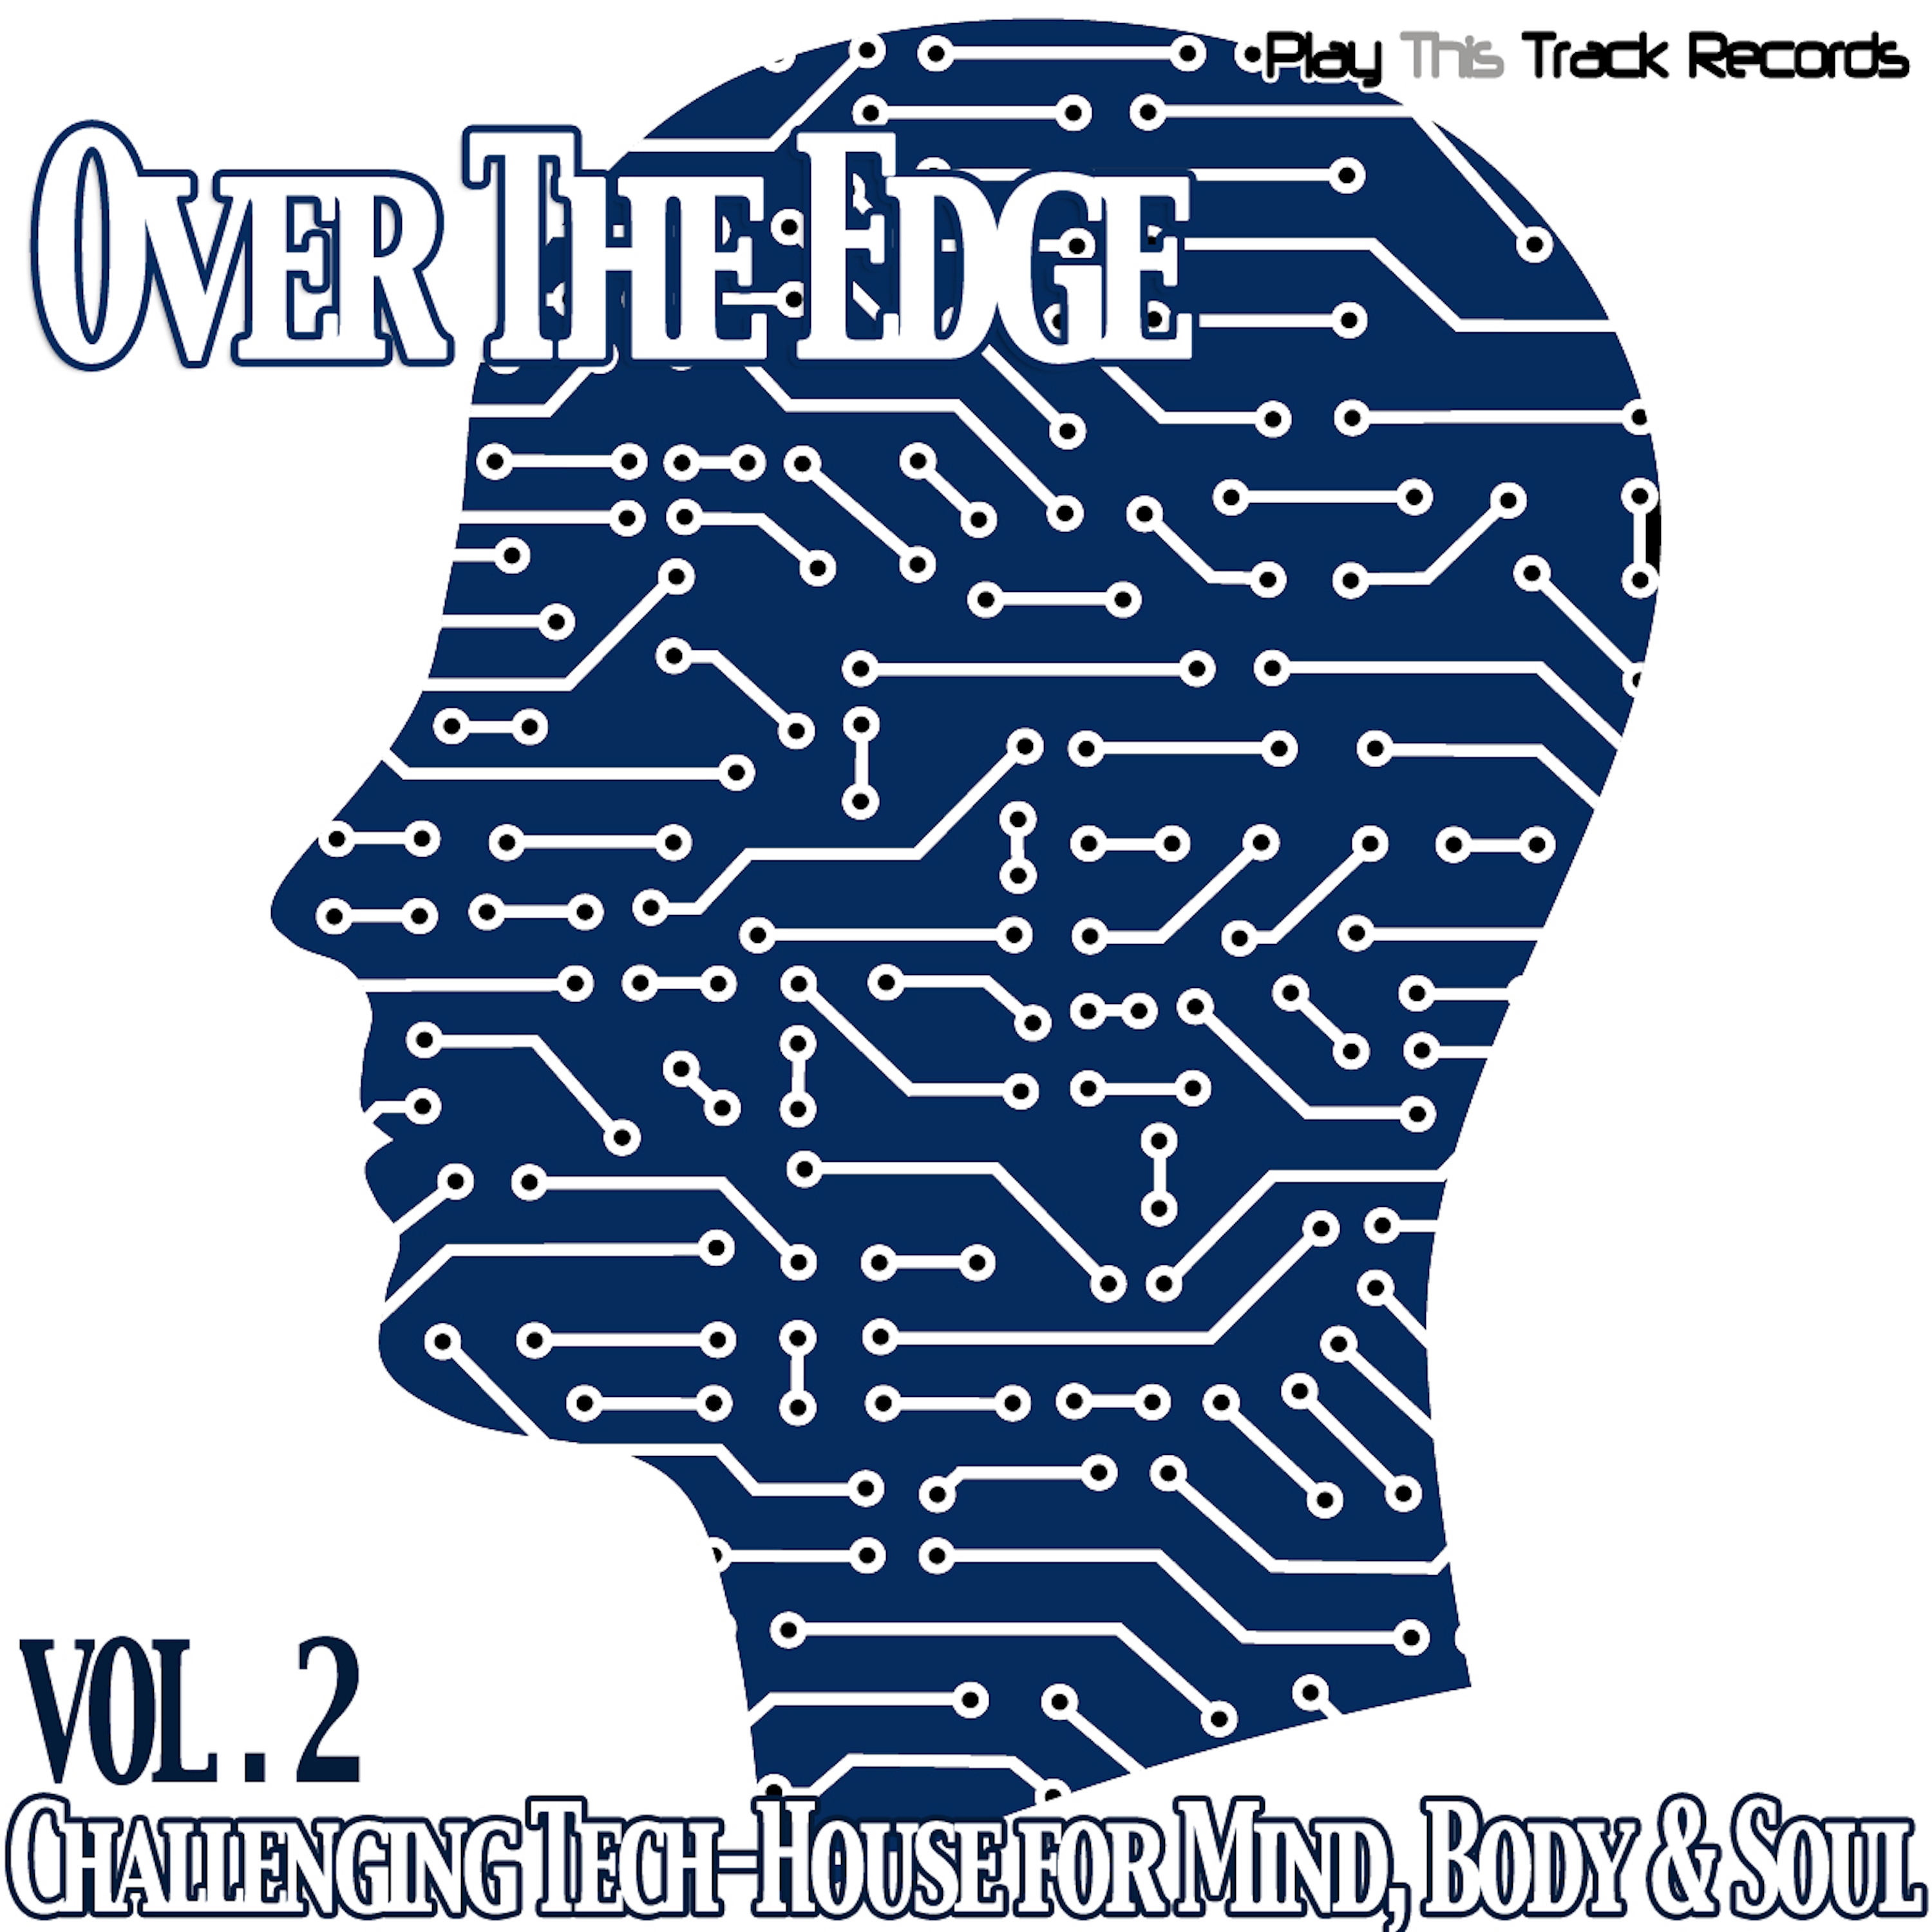 Over the Edge, Vol. 2 - Challenging Tech-House for Mind, Body & Soul